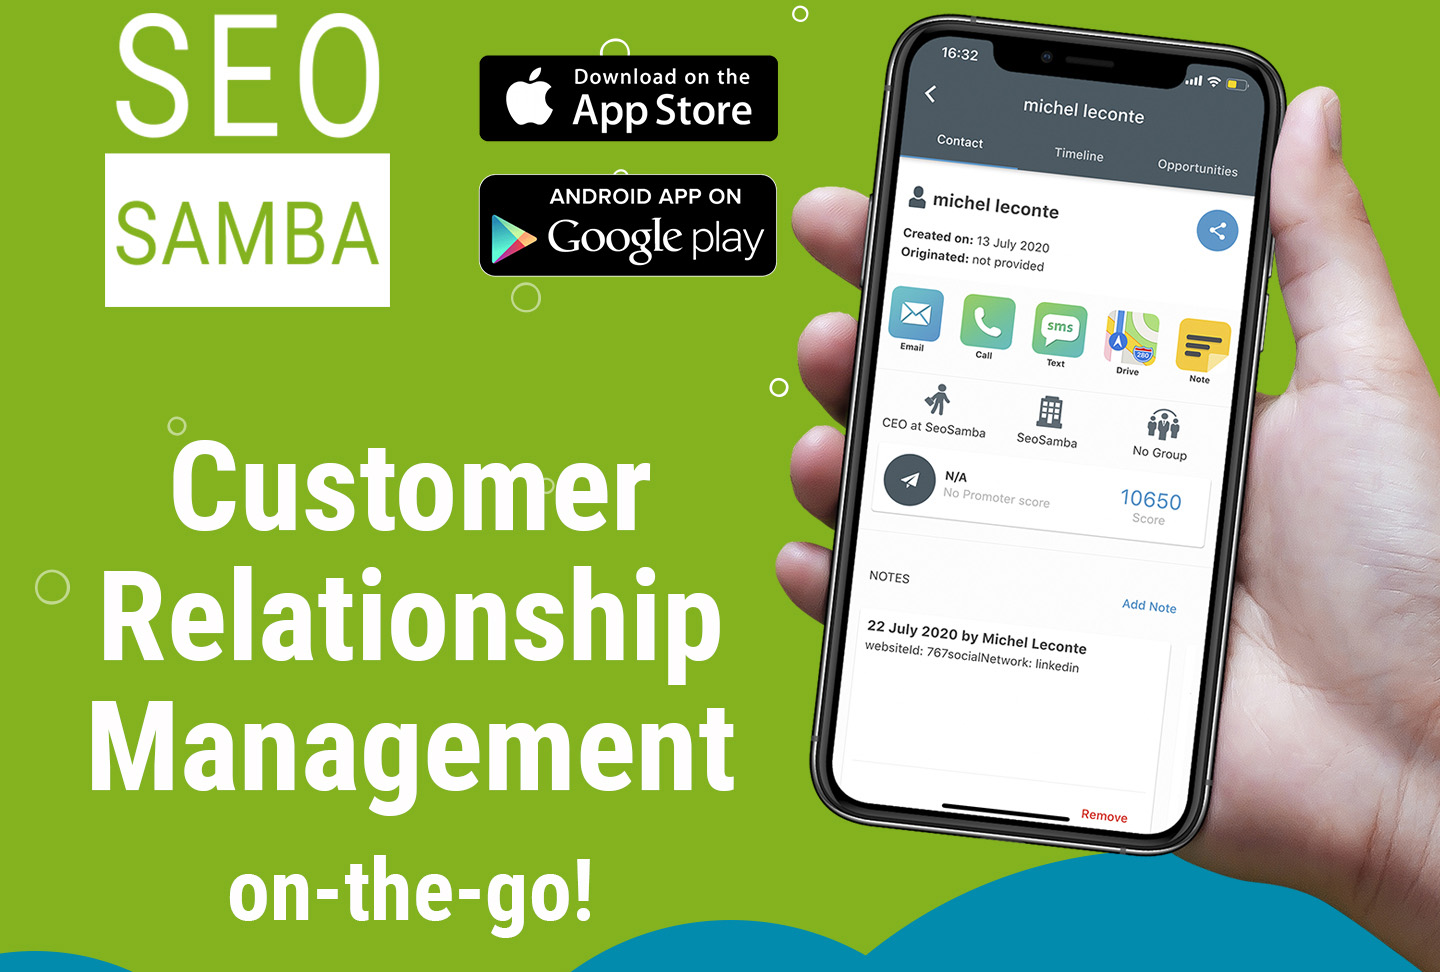 SeoSamba Launches First Mobile CRM App With On-Premise CRM And Multi-location Businesses Support